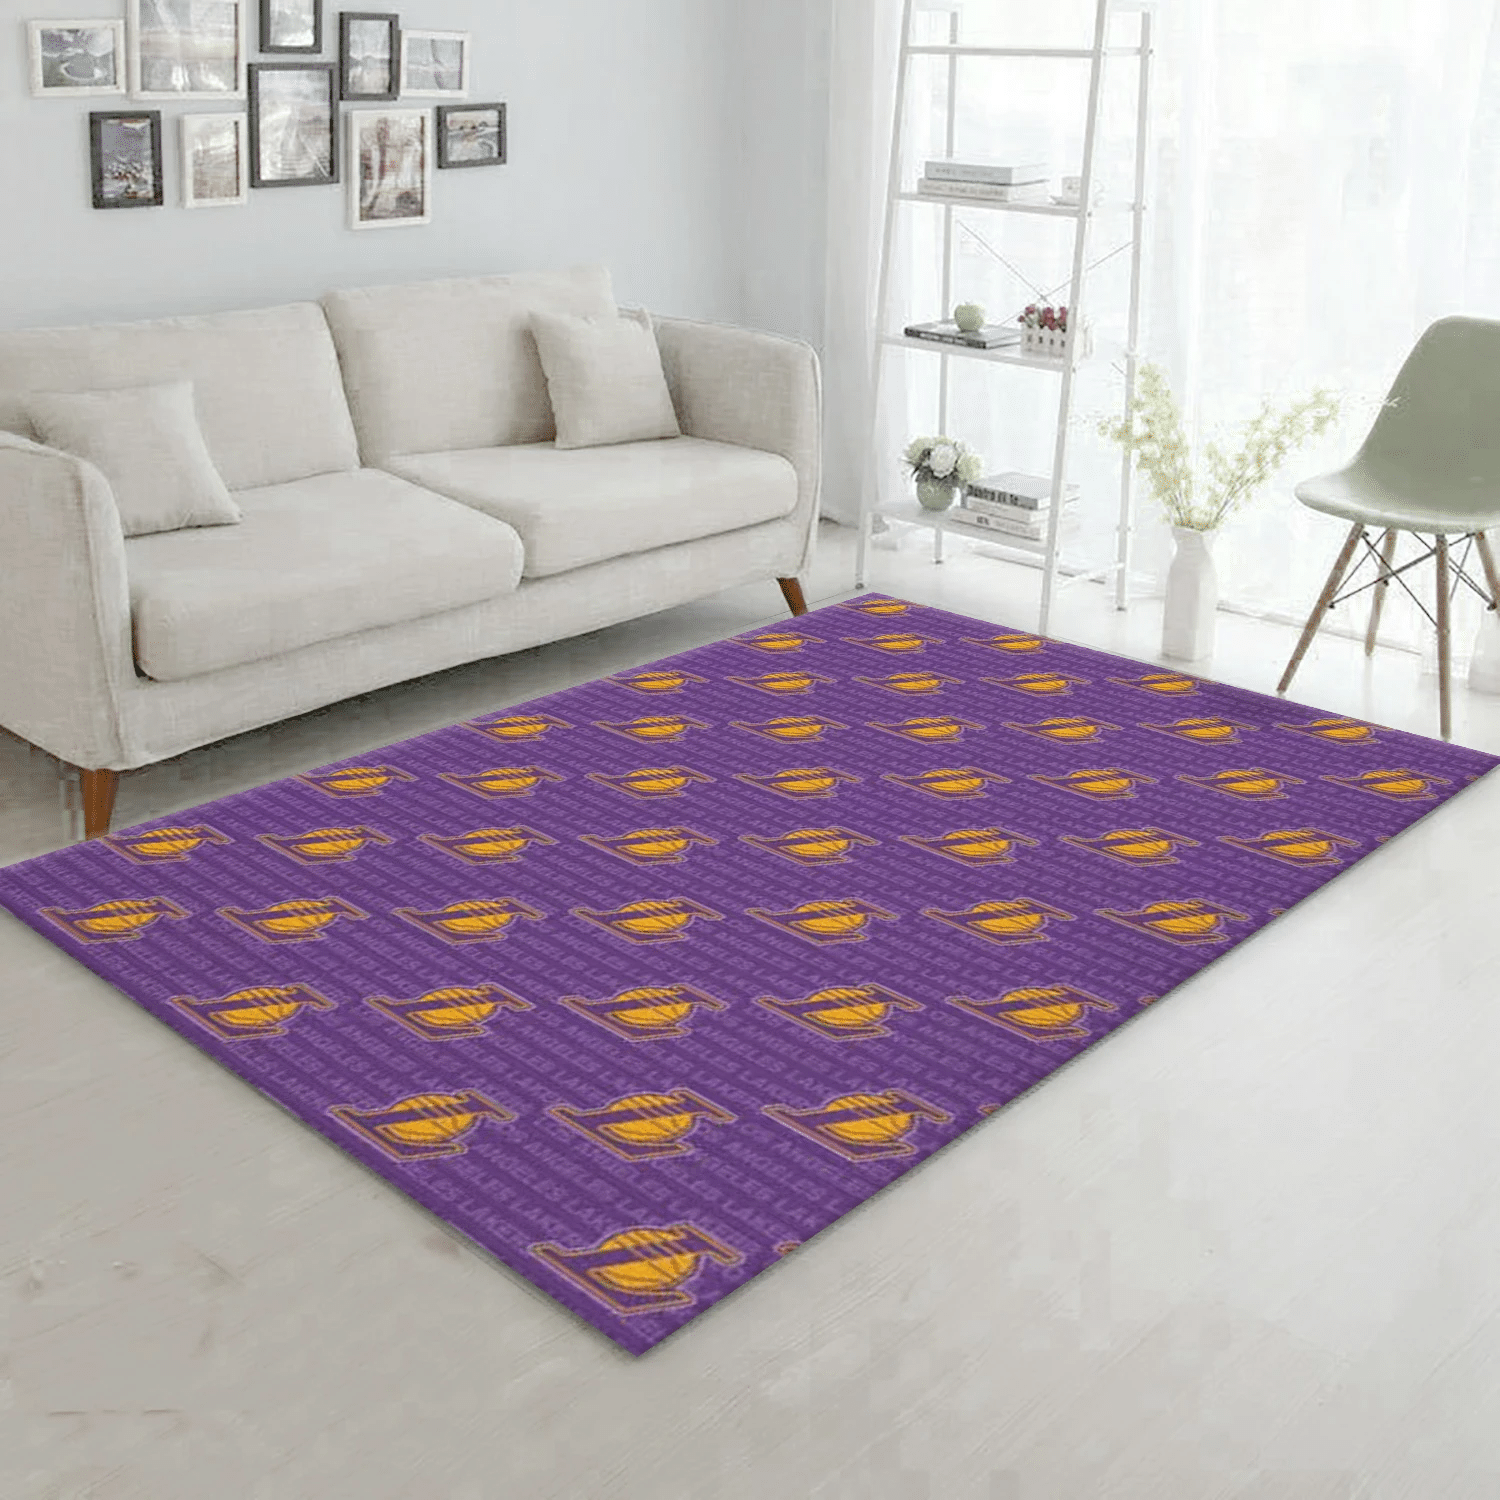 Los Angeles Lakers Patterns 1 Reangle Area Rug, Bedroom Rug - Family Gift US Decor - Indoor Outdoor Rugs 1